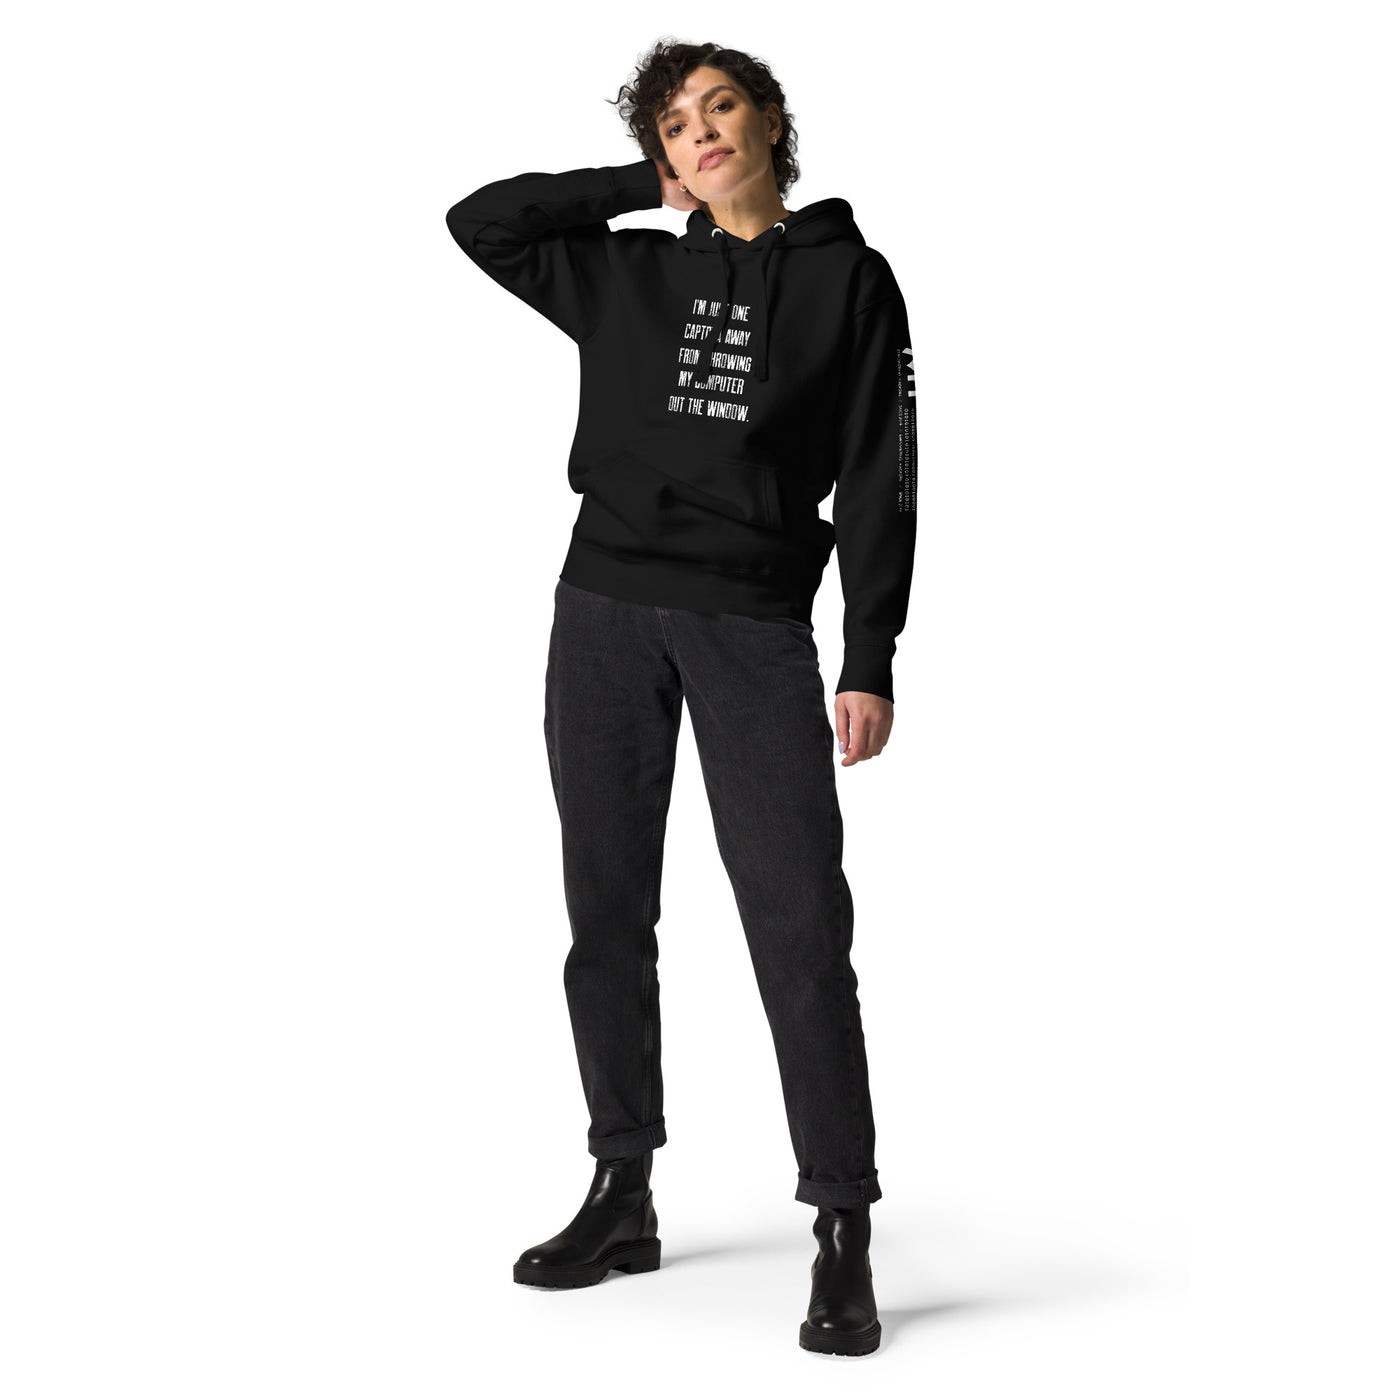 I'm Just one CAPTCHA away from throwing my Computer away V1 - Unisex Hoodie